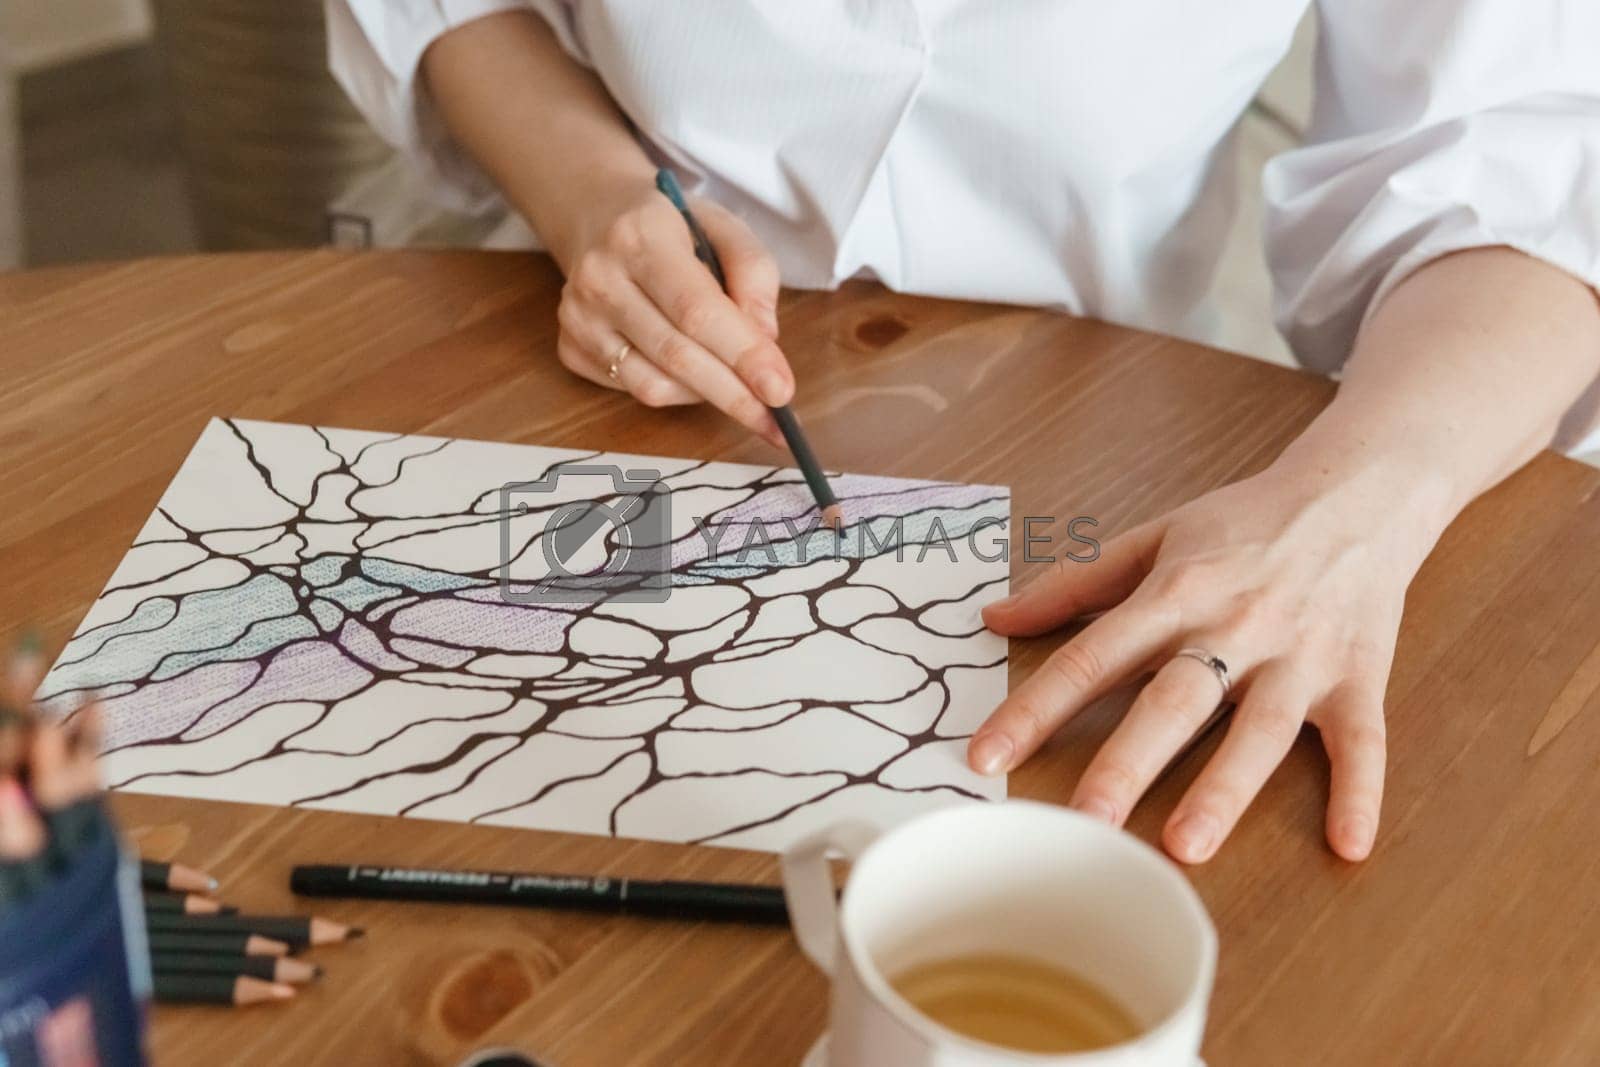 Royalty free image of TVER, RUSSIA - FEBRUARY 25, 2023: Woman draws neurographics at table at a psychological session, neurographic pencil drawing to remove restrictions, art therapy by Annu1tochka